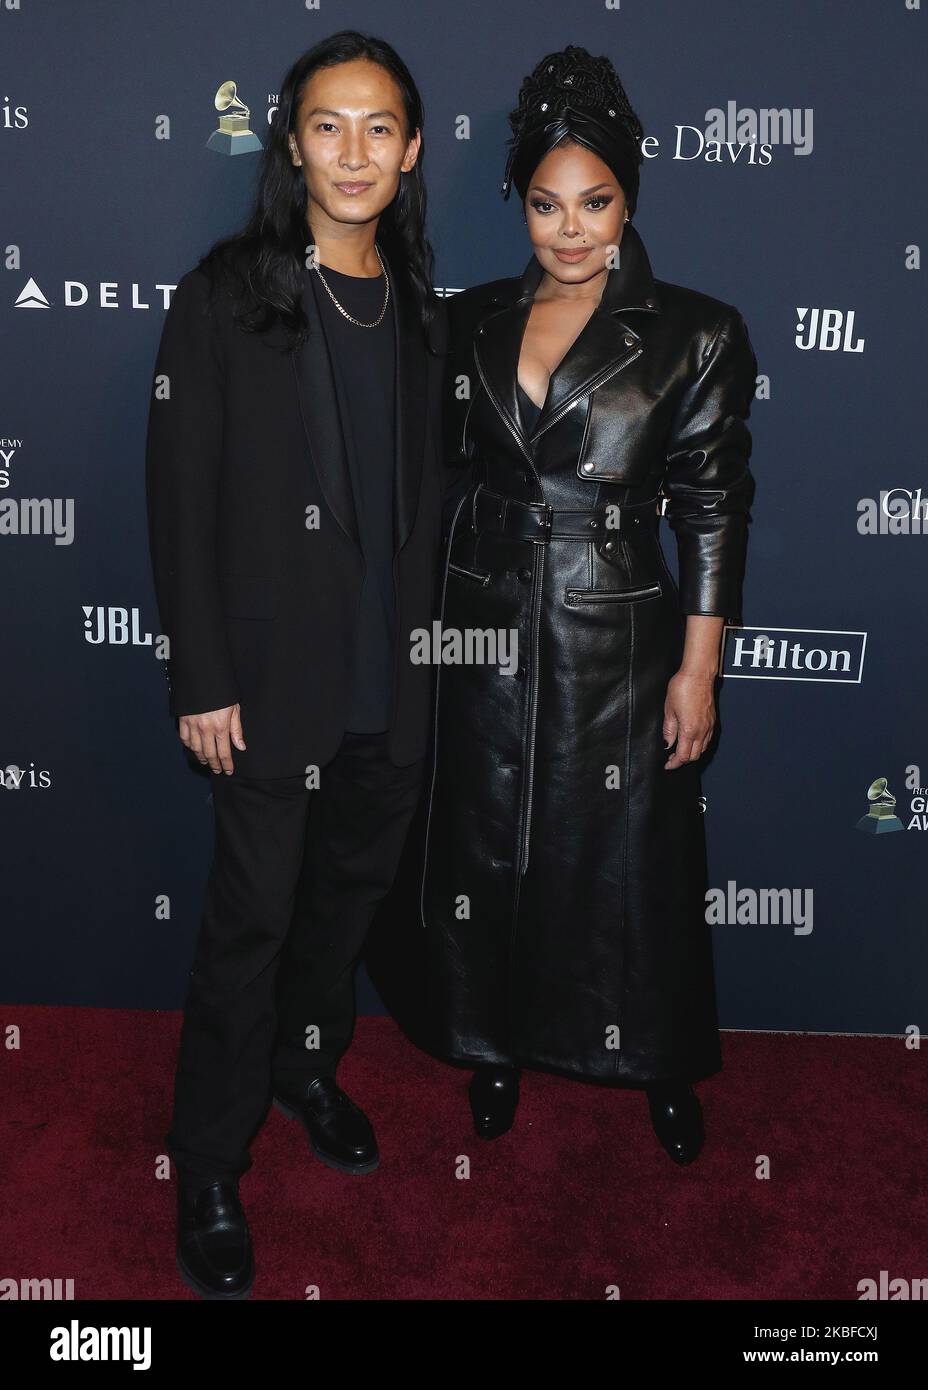 BEVERLY HILLS, LOS ANGELES, CALIFORNIA, USA - JANUARY 25: Alexander Wang and Janet Jackson arrive at The Recording Academy And Clive Davis' 2020 Pre-GRAMMY Gala held at The Beverly Hilton Hotel on January 25, 2020 in Beverly Hills, Los Angeles, California, United States. (Photo by Xavier Collin/Image Press Agency/NurPhoto) Stock Photo